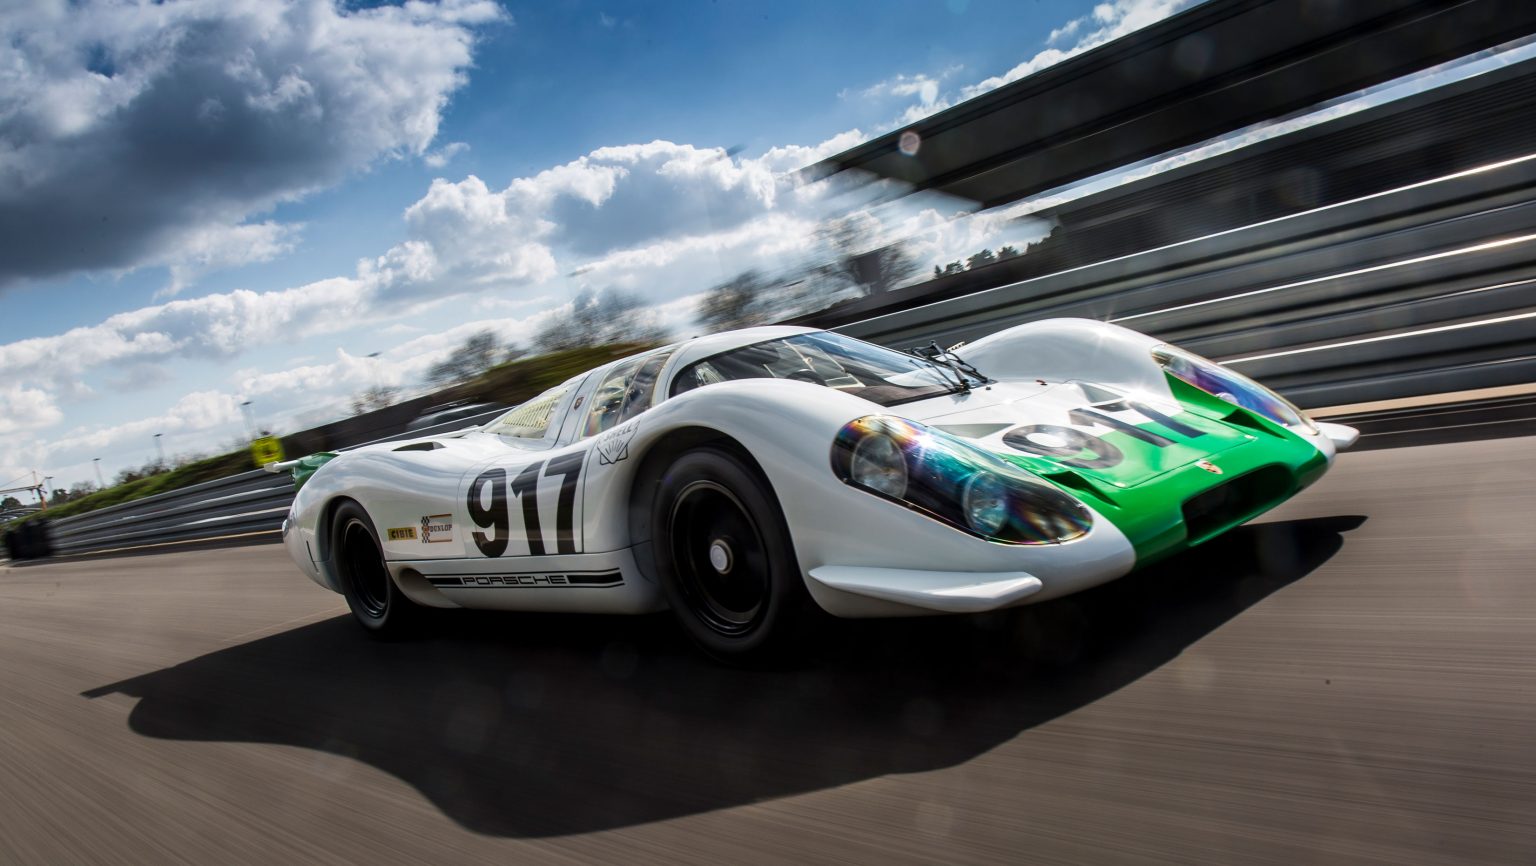 The First Porsche 917 from 1969 Has been Restored, But The Car Was Never Raced.